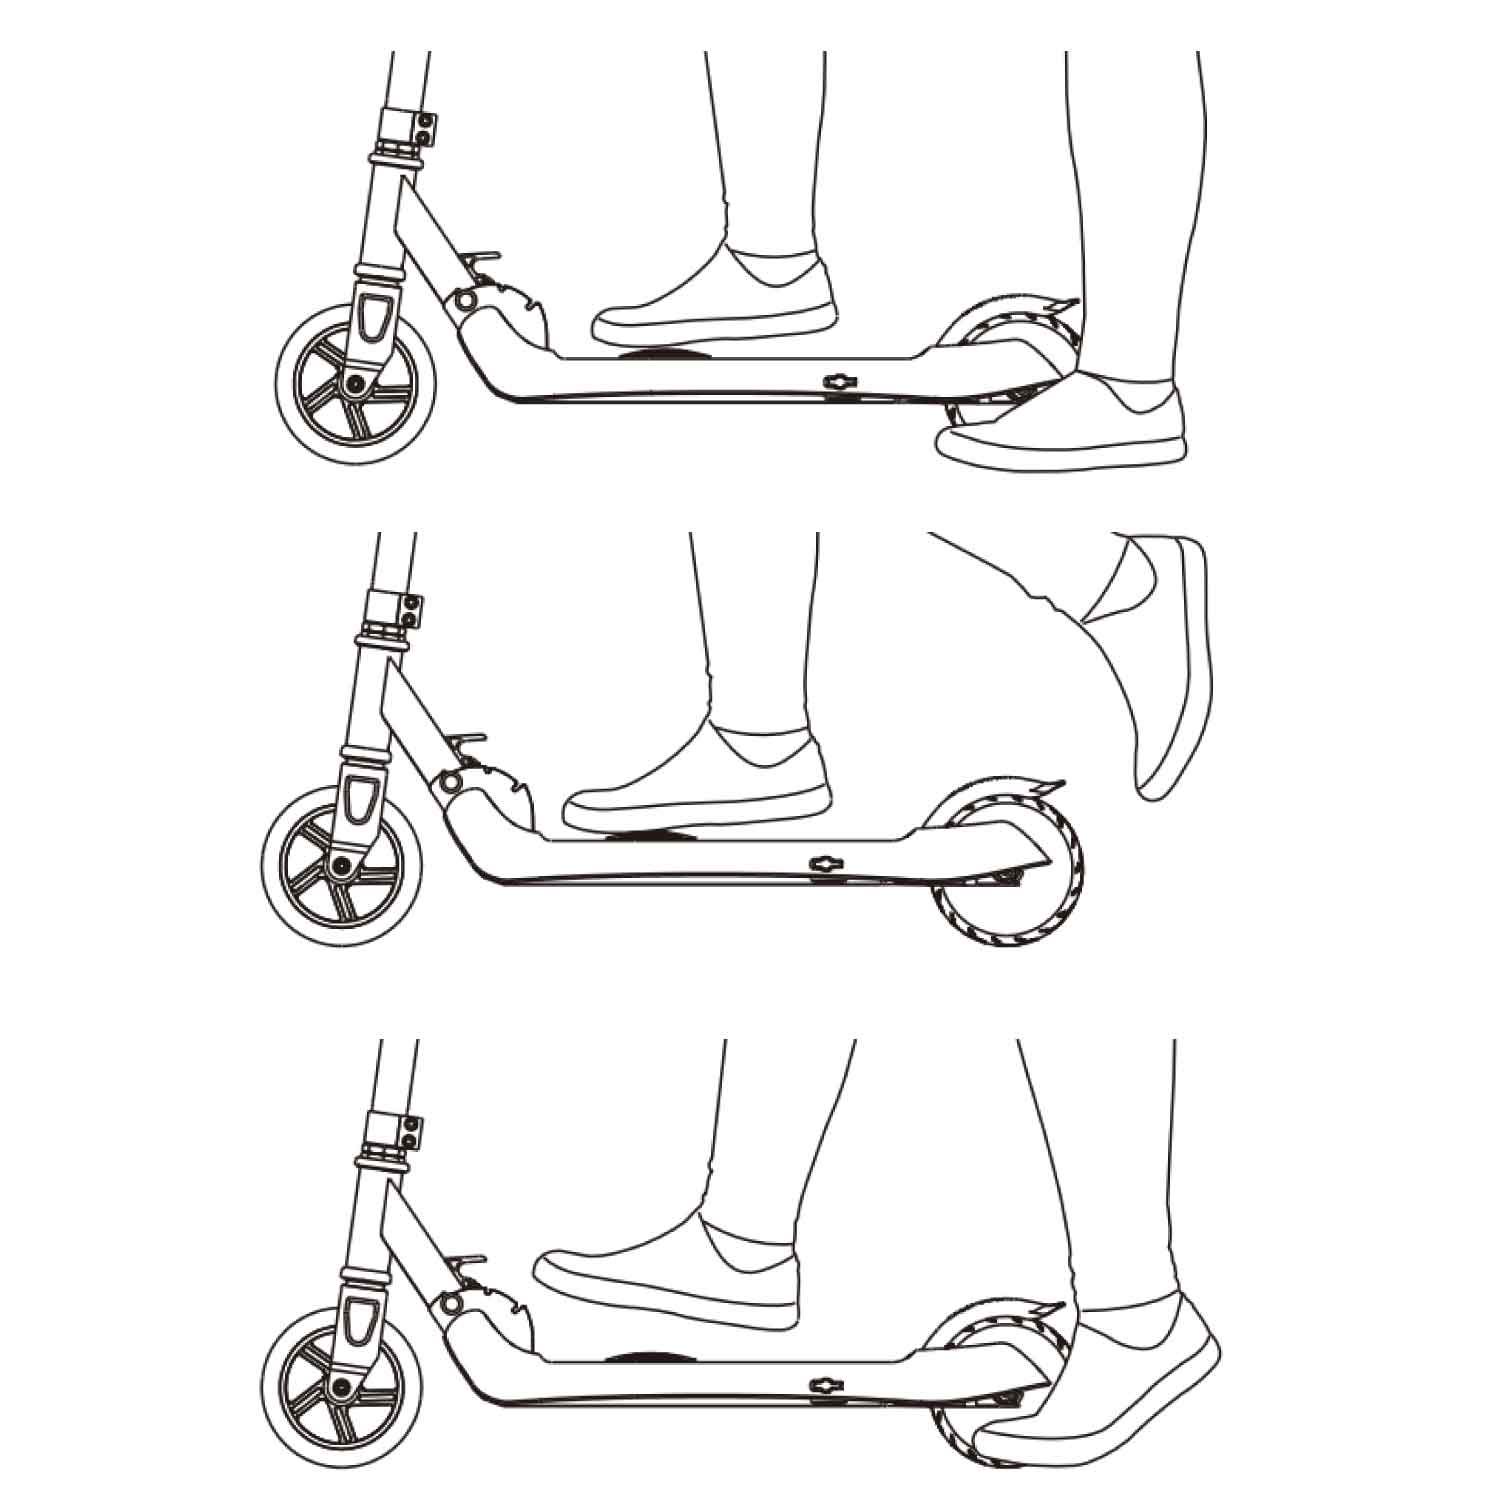 How to operate the EVO VT1 electric scooter